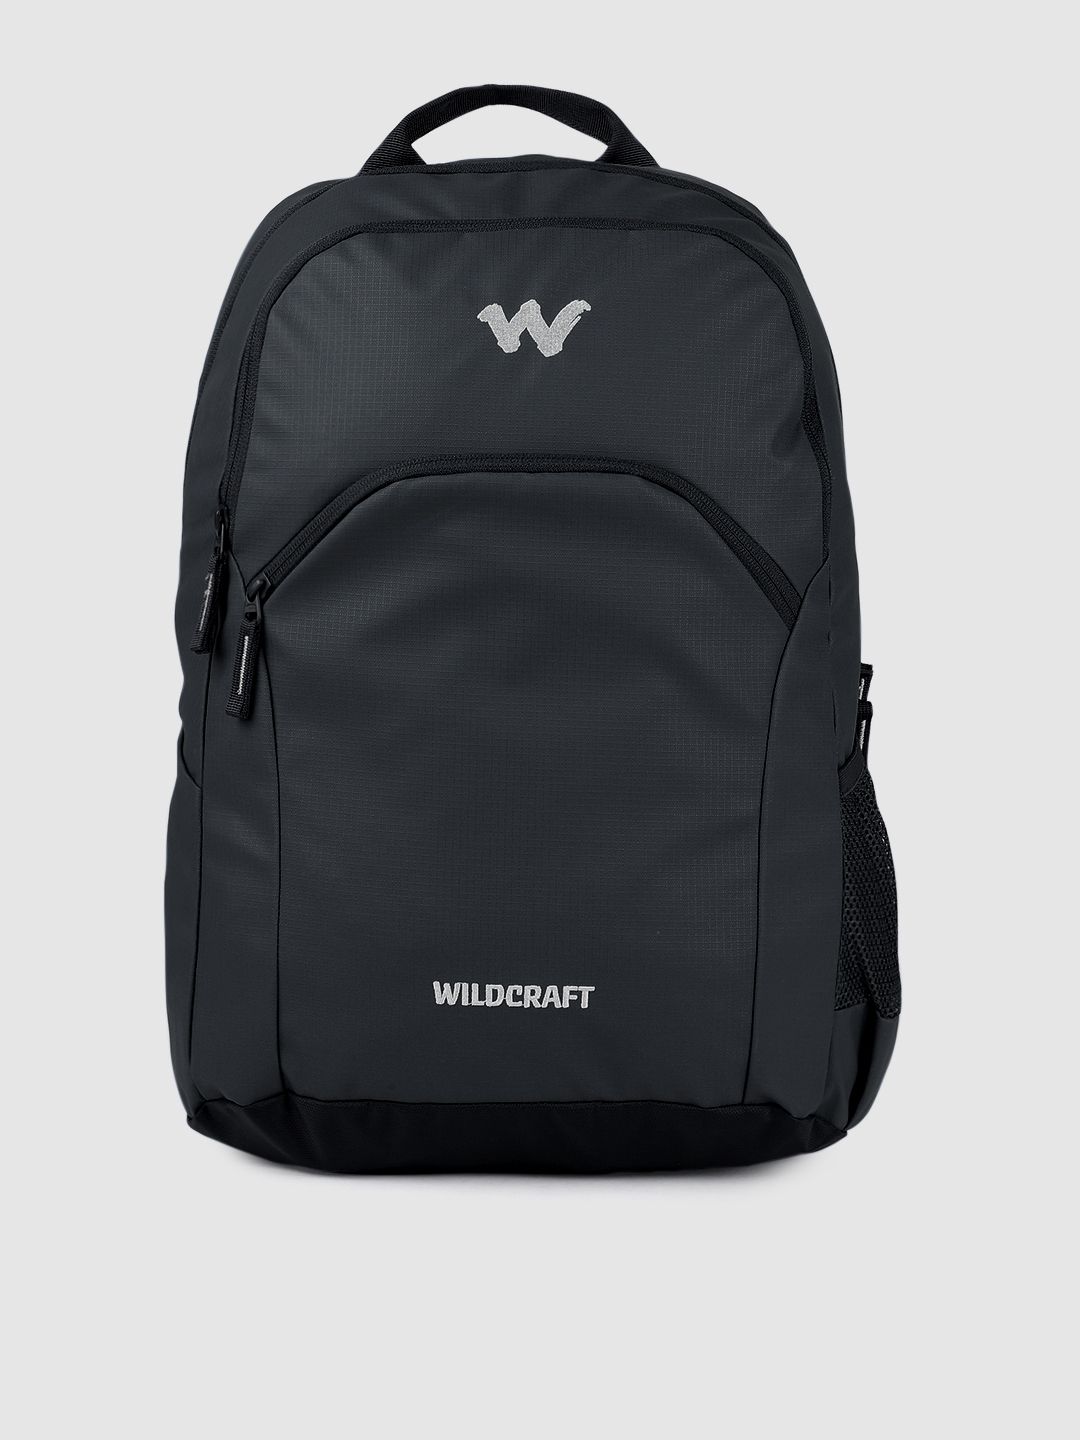 Wildcraft Unisex Black Solid Ace 2 Coated Backpack Price in India